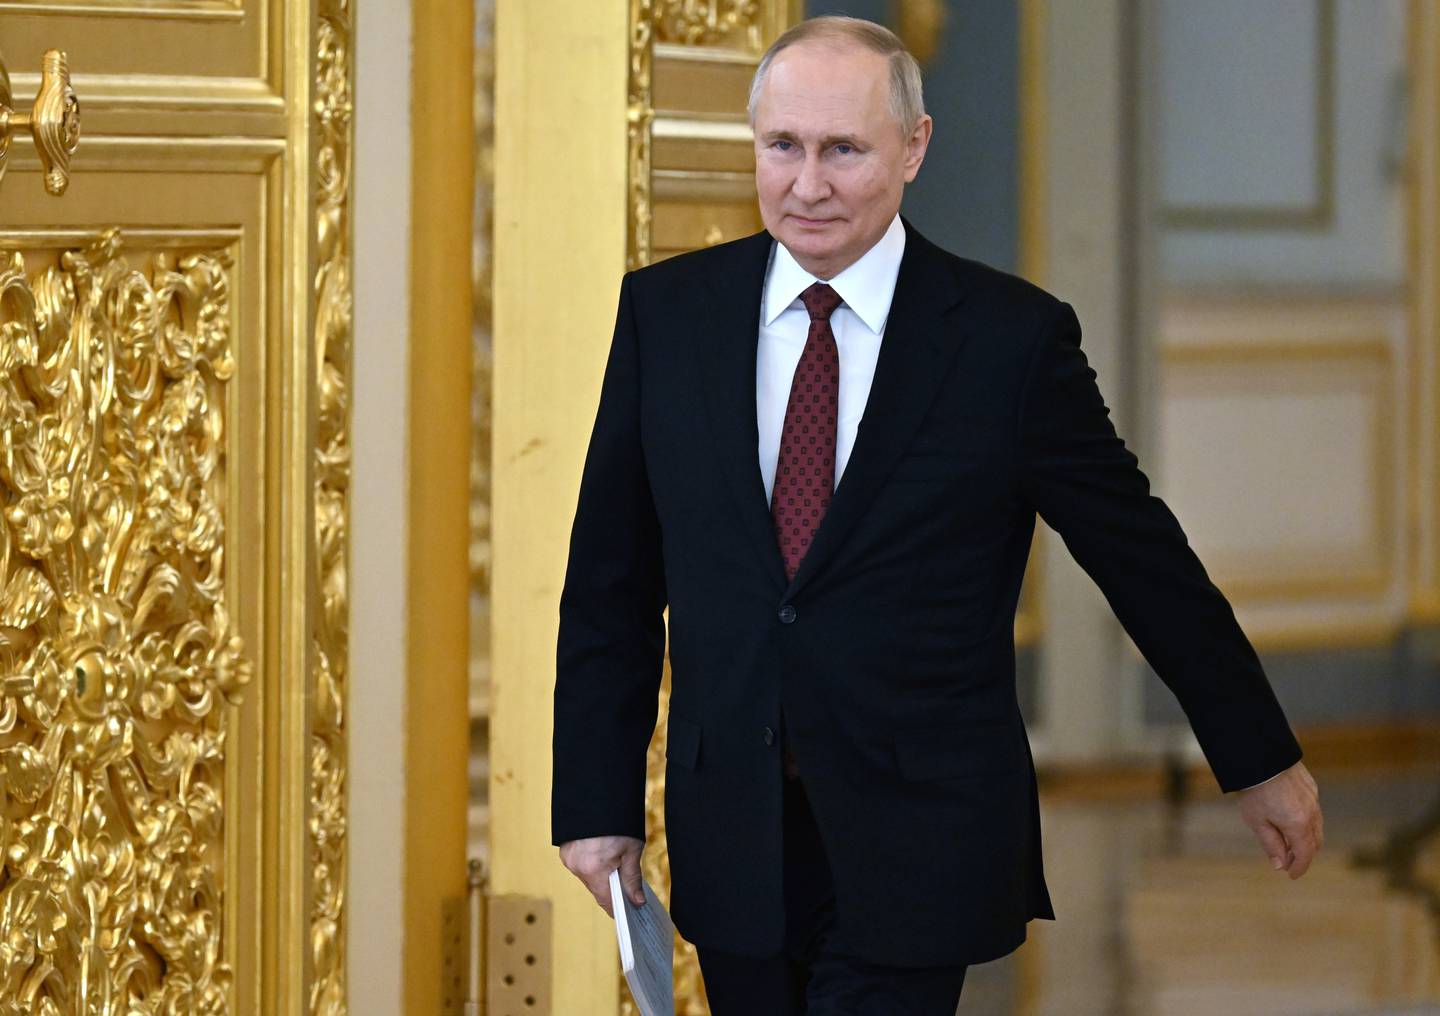 Russian President Vladimir Putin arrives for a ceremony to receive credentials from newly arrived foreign ambassadors at the Alexander Hall of the Grand Kremlin Palace in Moscow, Russia, Monday, Dec. 4, 2023. (Pavel Bednyakov, Sputnik, Kremlin Pool Photo via AP)